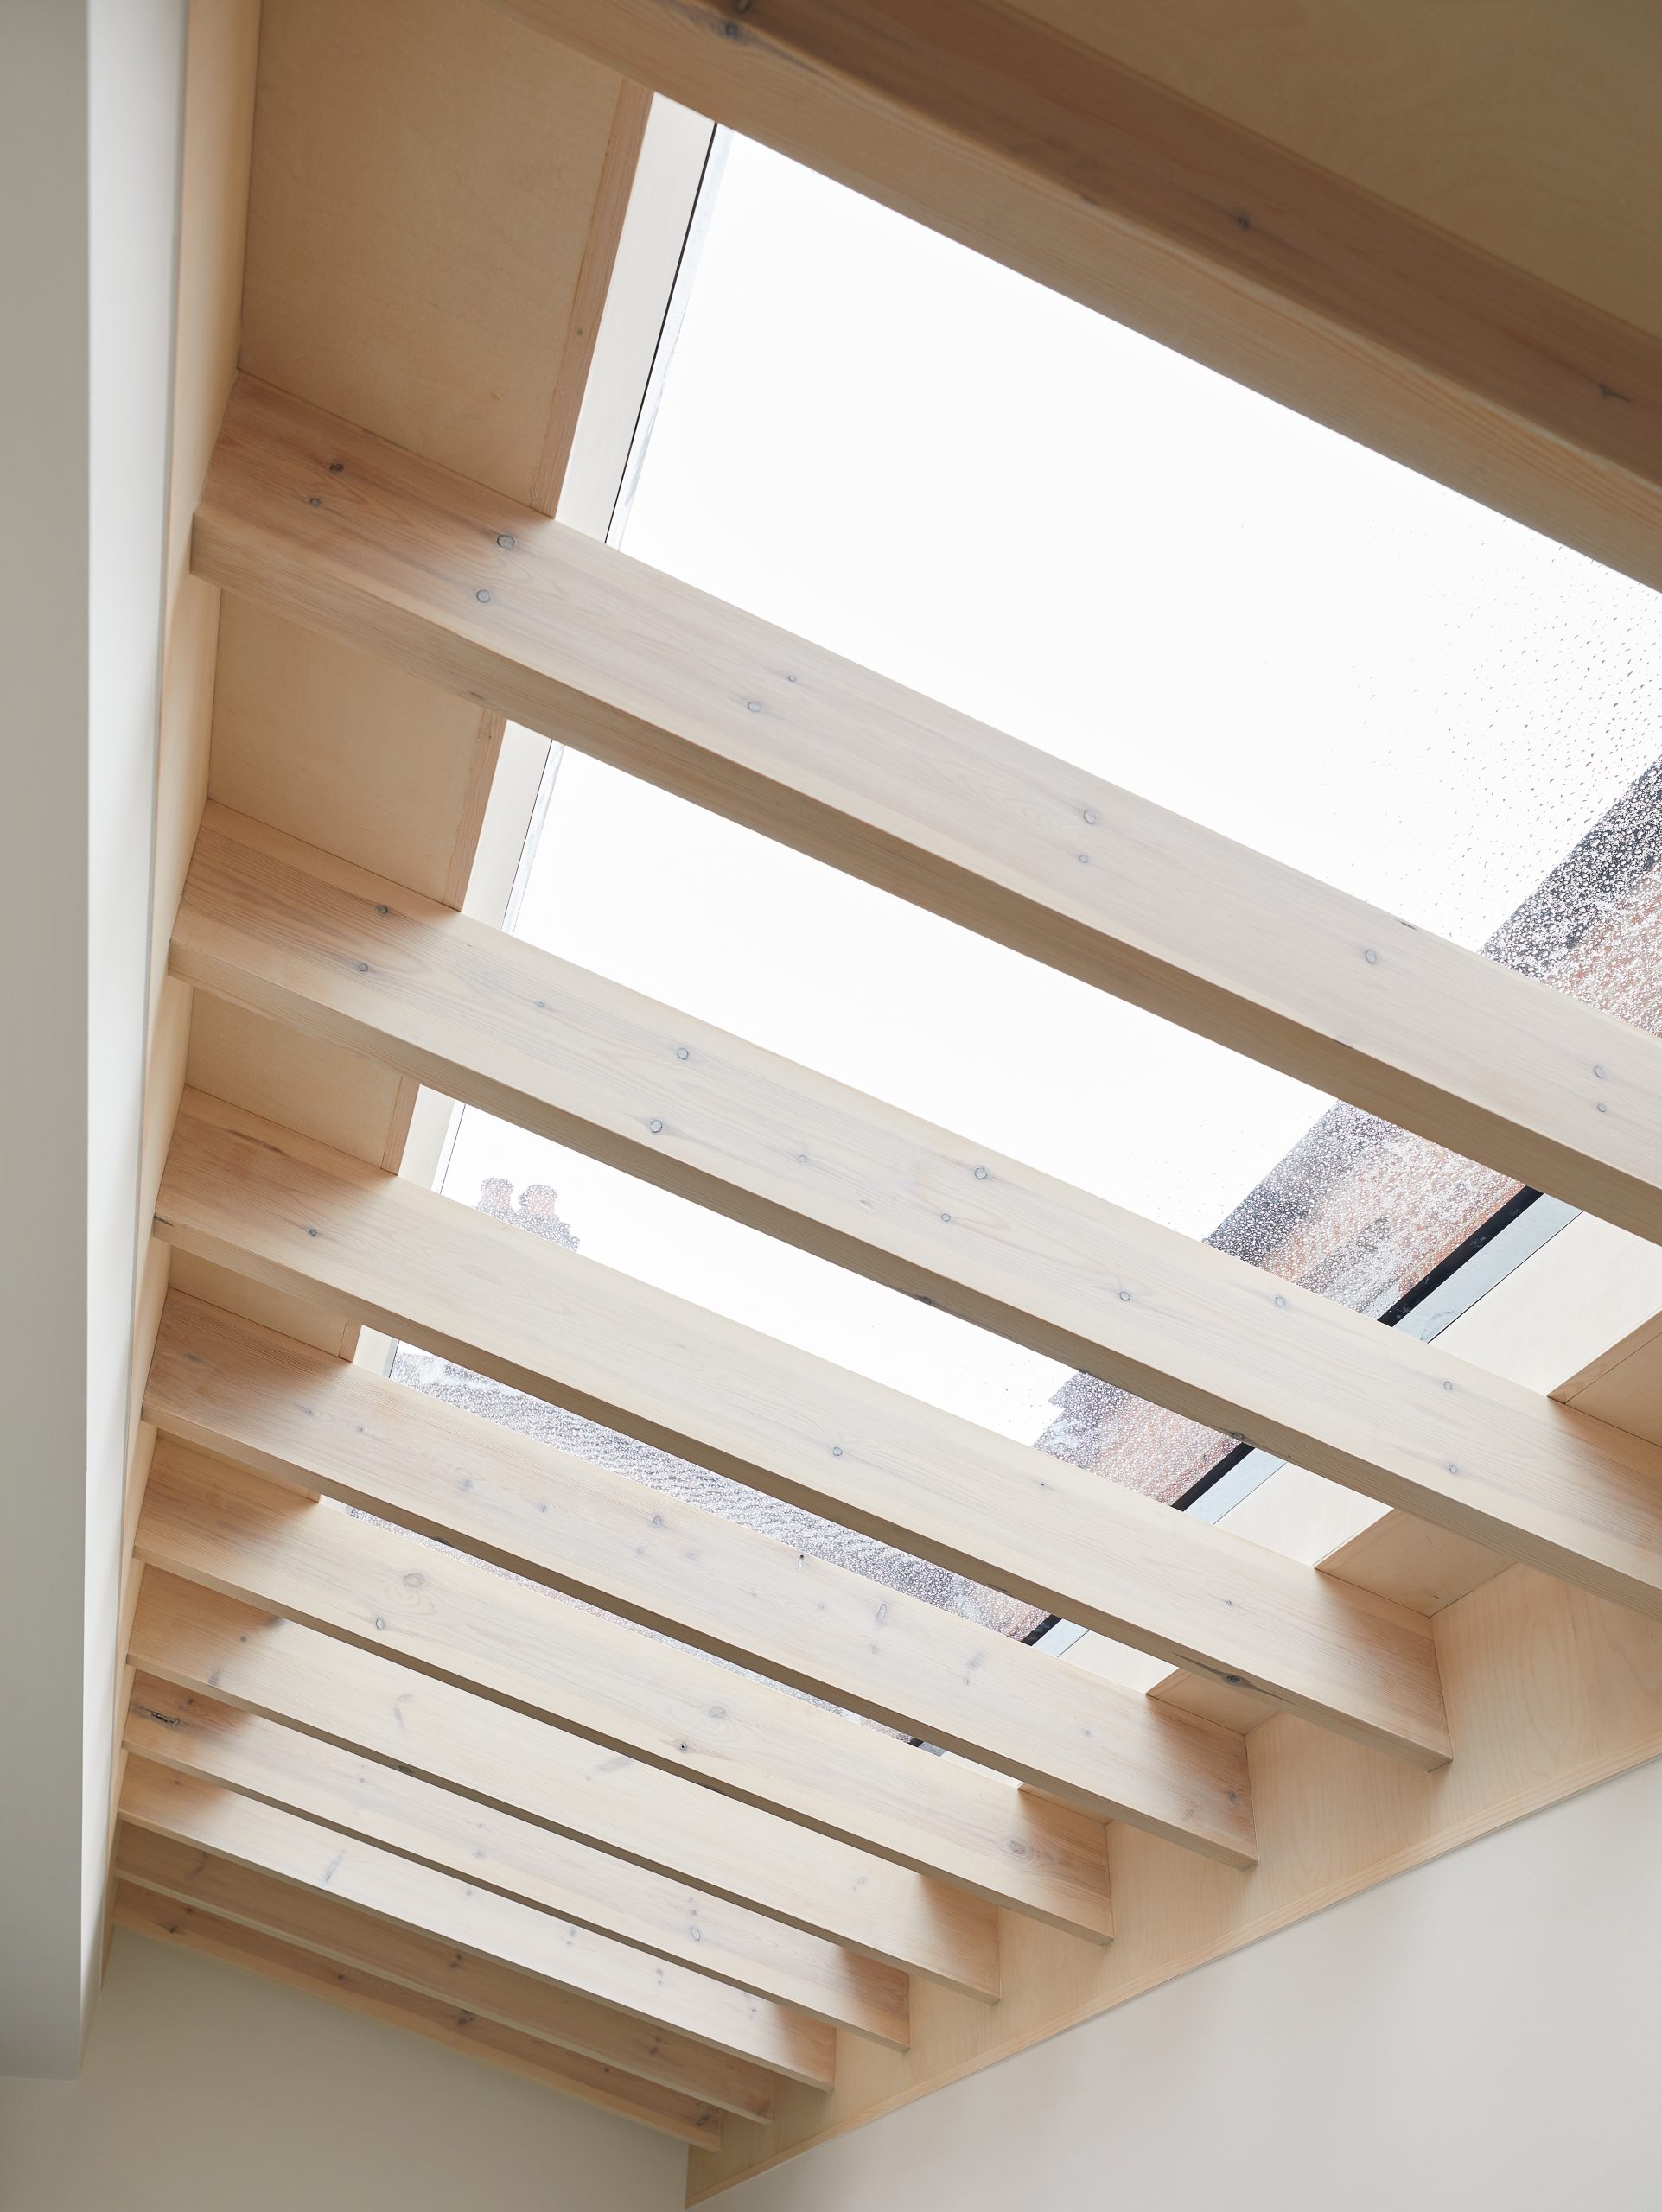 Pitched skylight